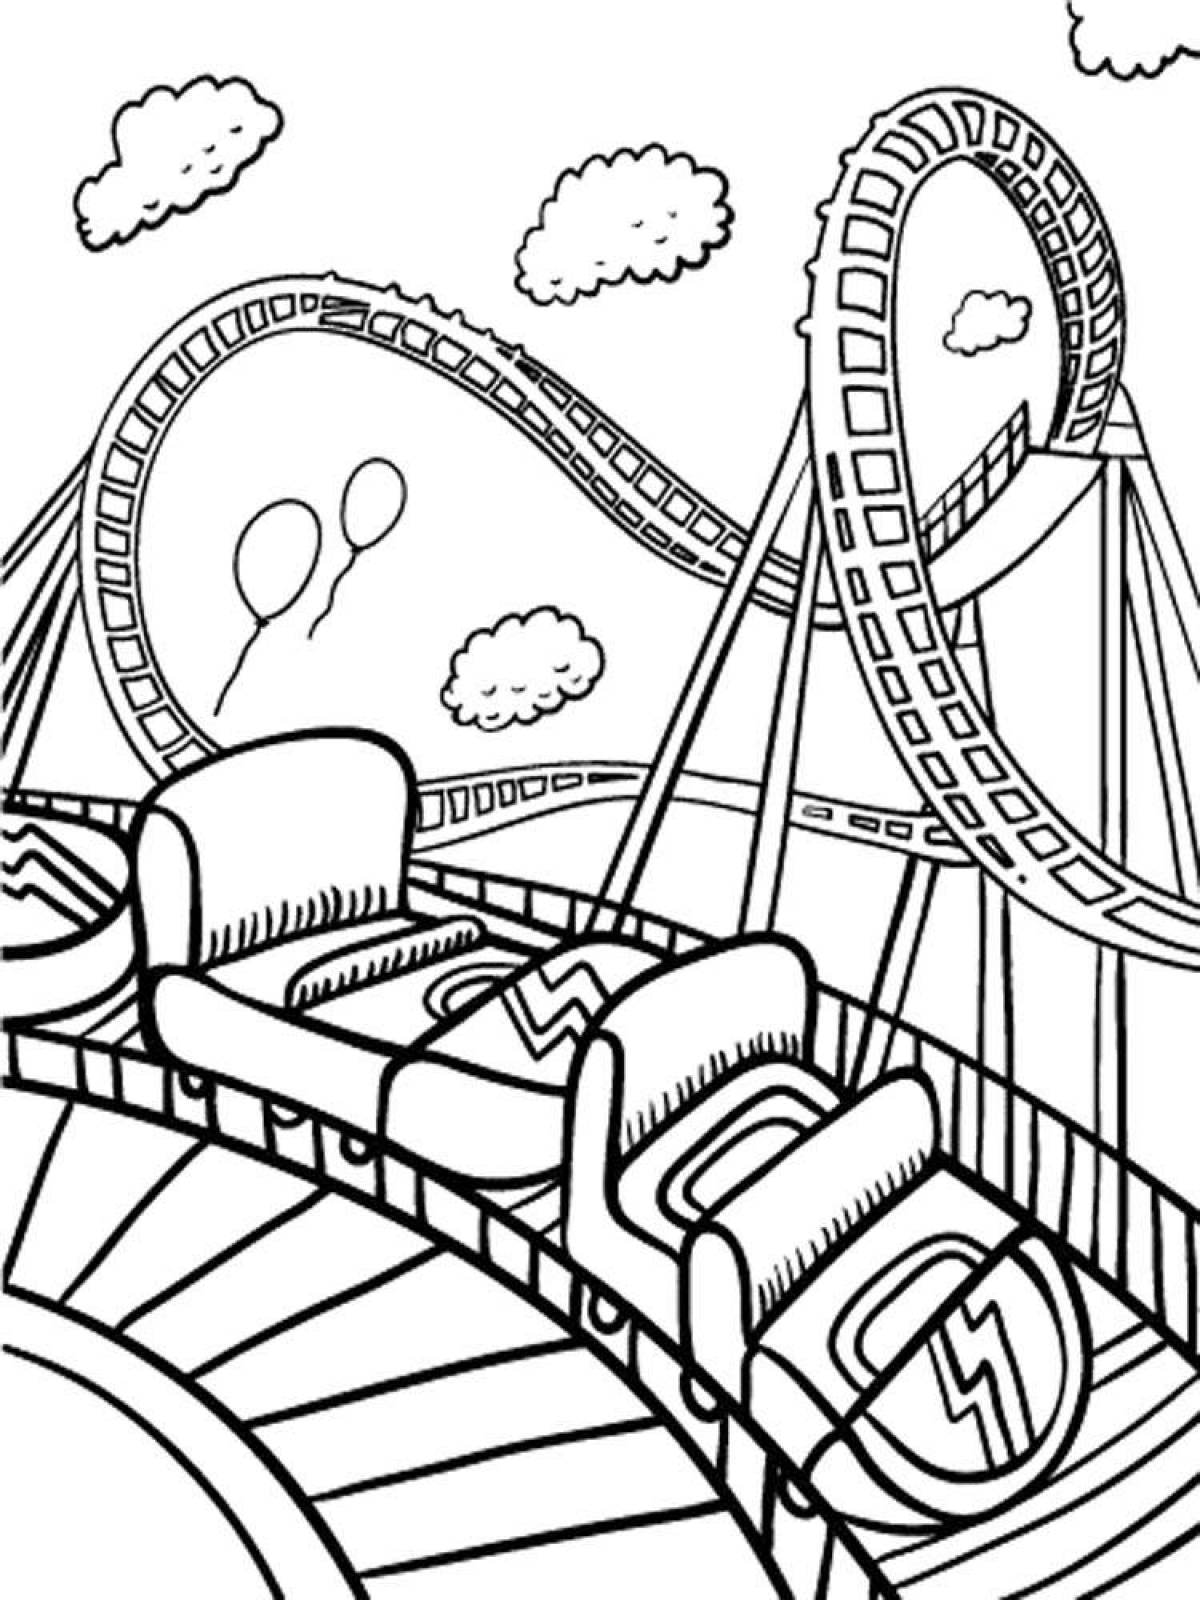 Attractive wensday coloring page